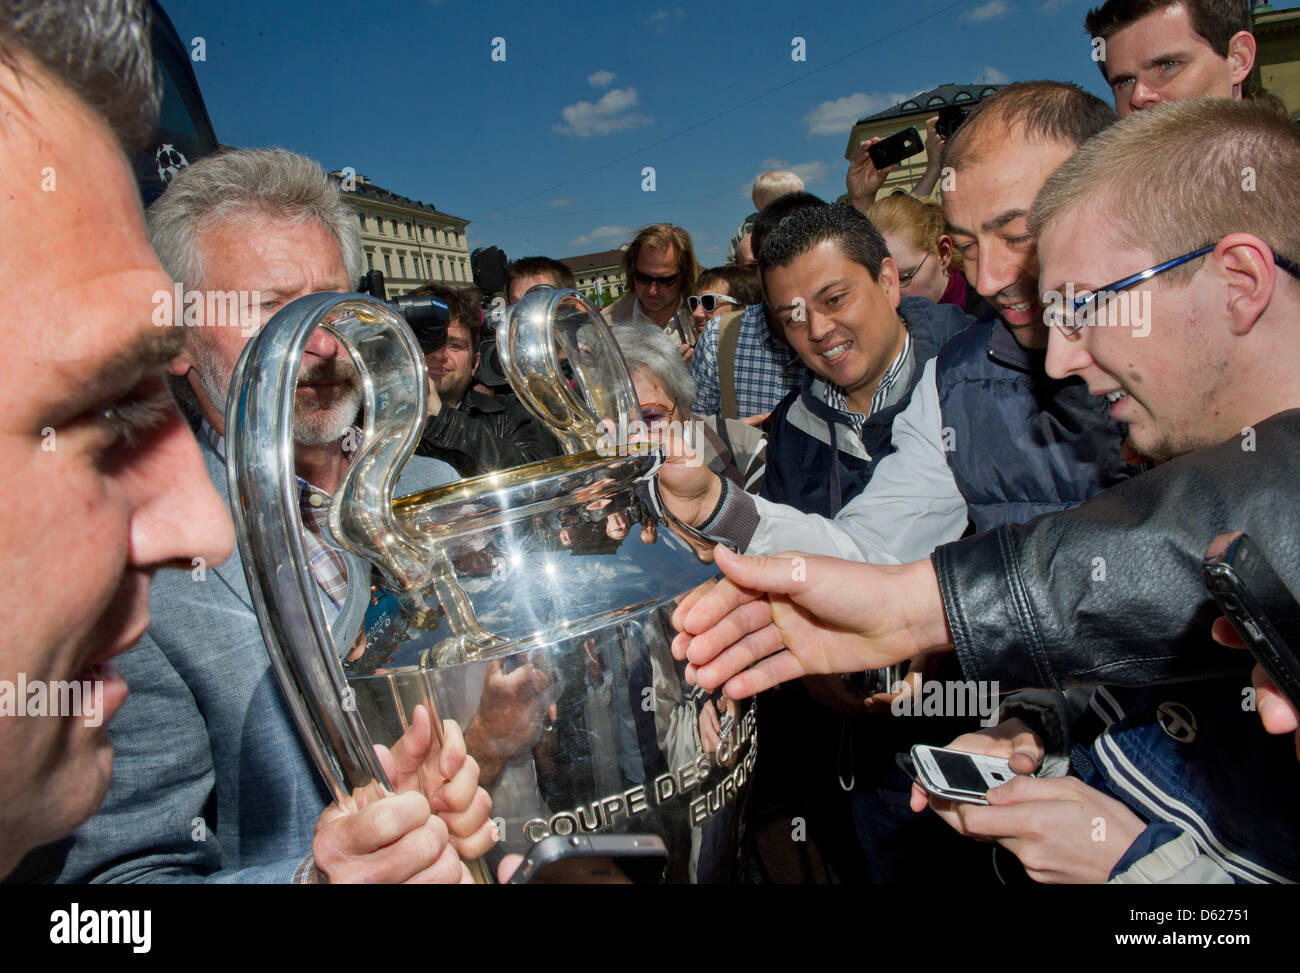 Former Bayern Munich soccer players Paul Breitner (L) presents the UEFA Champions League Cup during a Champions League Cup bus tour in Munich, Germany, 14 May 2012. The Champions League final match between FC Bayern Munich and Chelsea FC will take place on 19 May 2012. Photo: PETER KNEFFEL Stock Photo